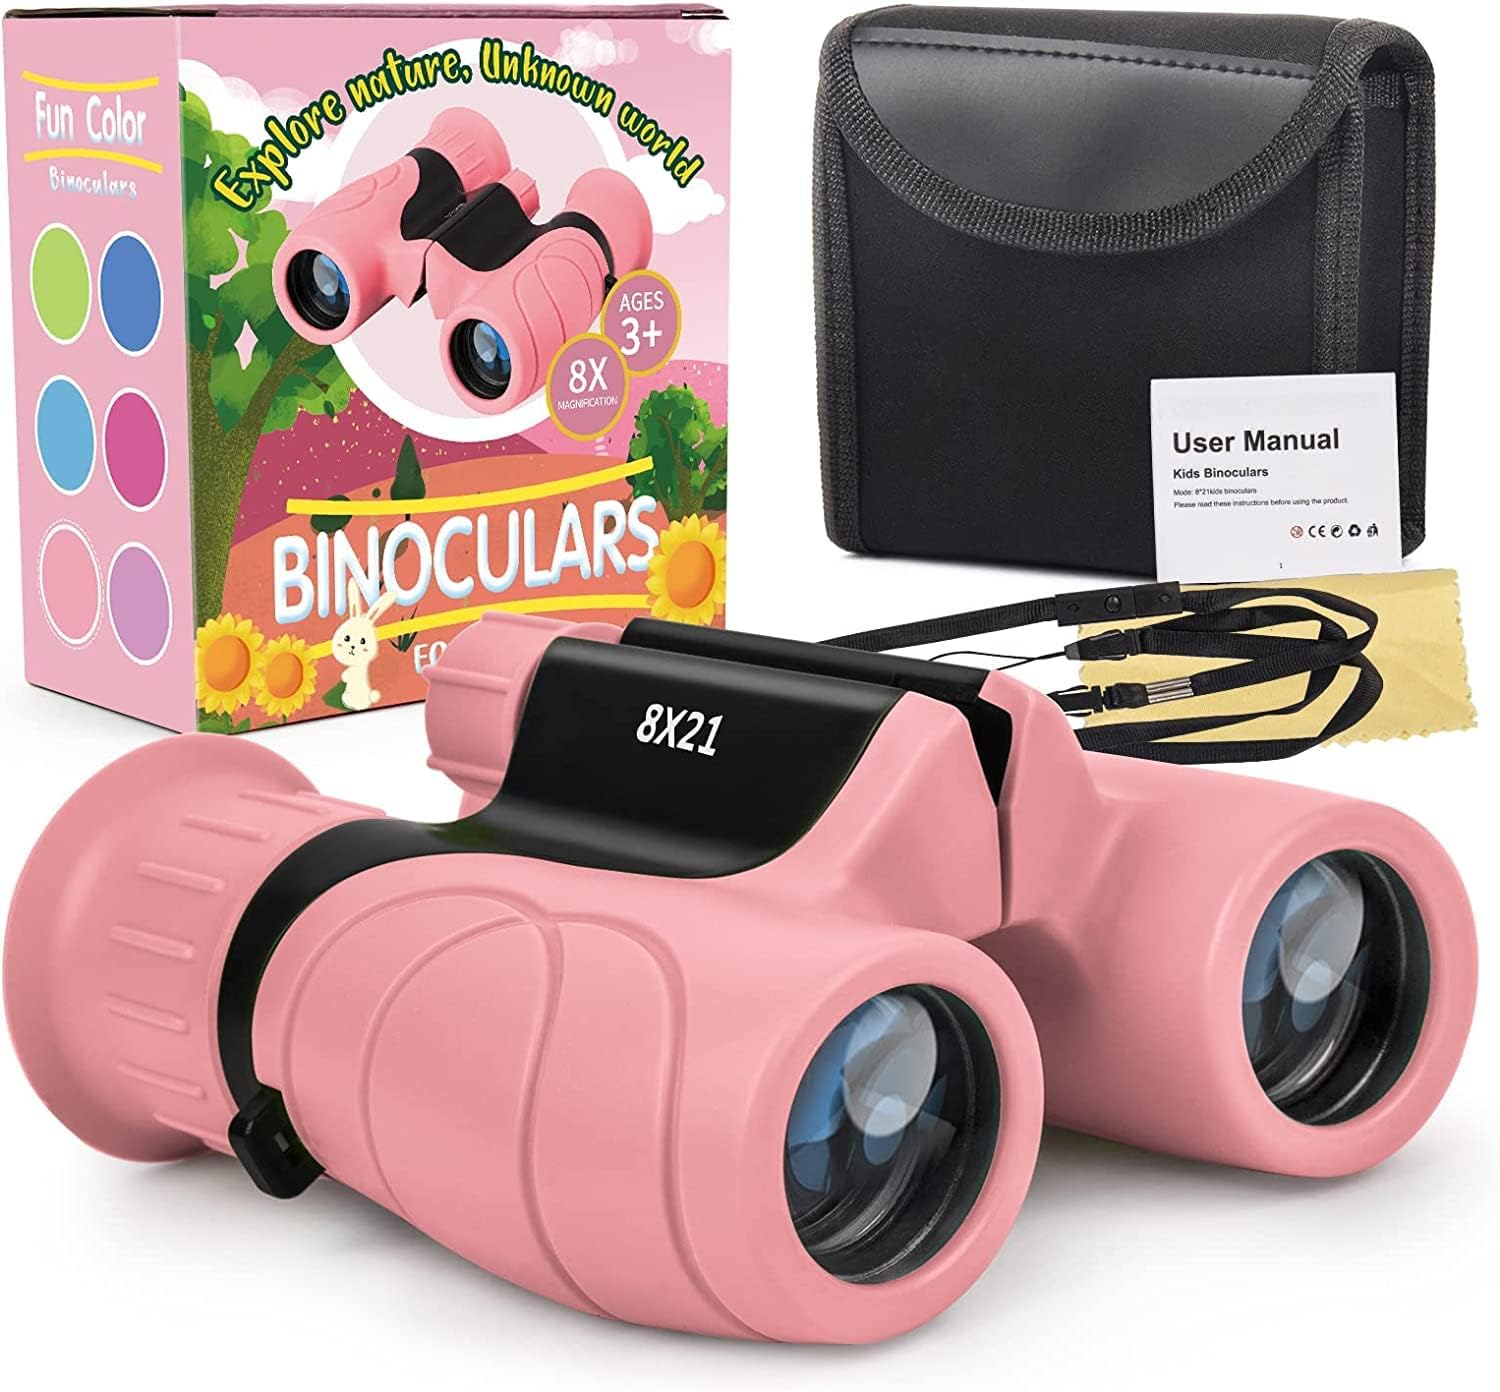 Binoculars for Children Magnification 8 x 21, Boys and Girls, Shockproof, Compact Childrens Binoculars for Bird Watching, Hiking, Camping, Spy Games and Explorations